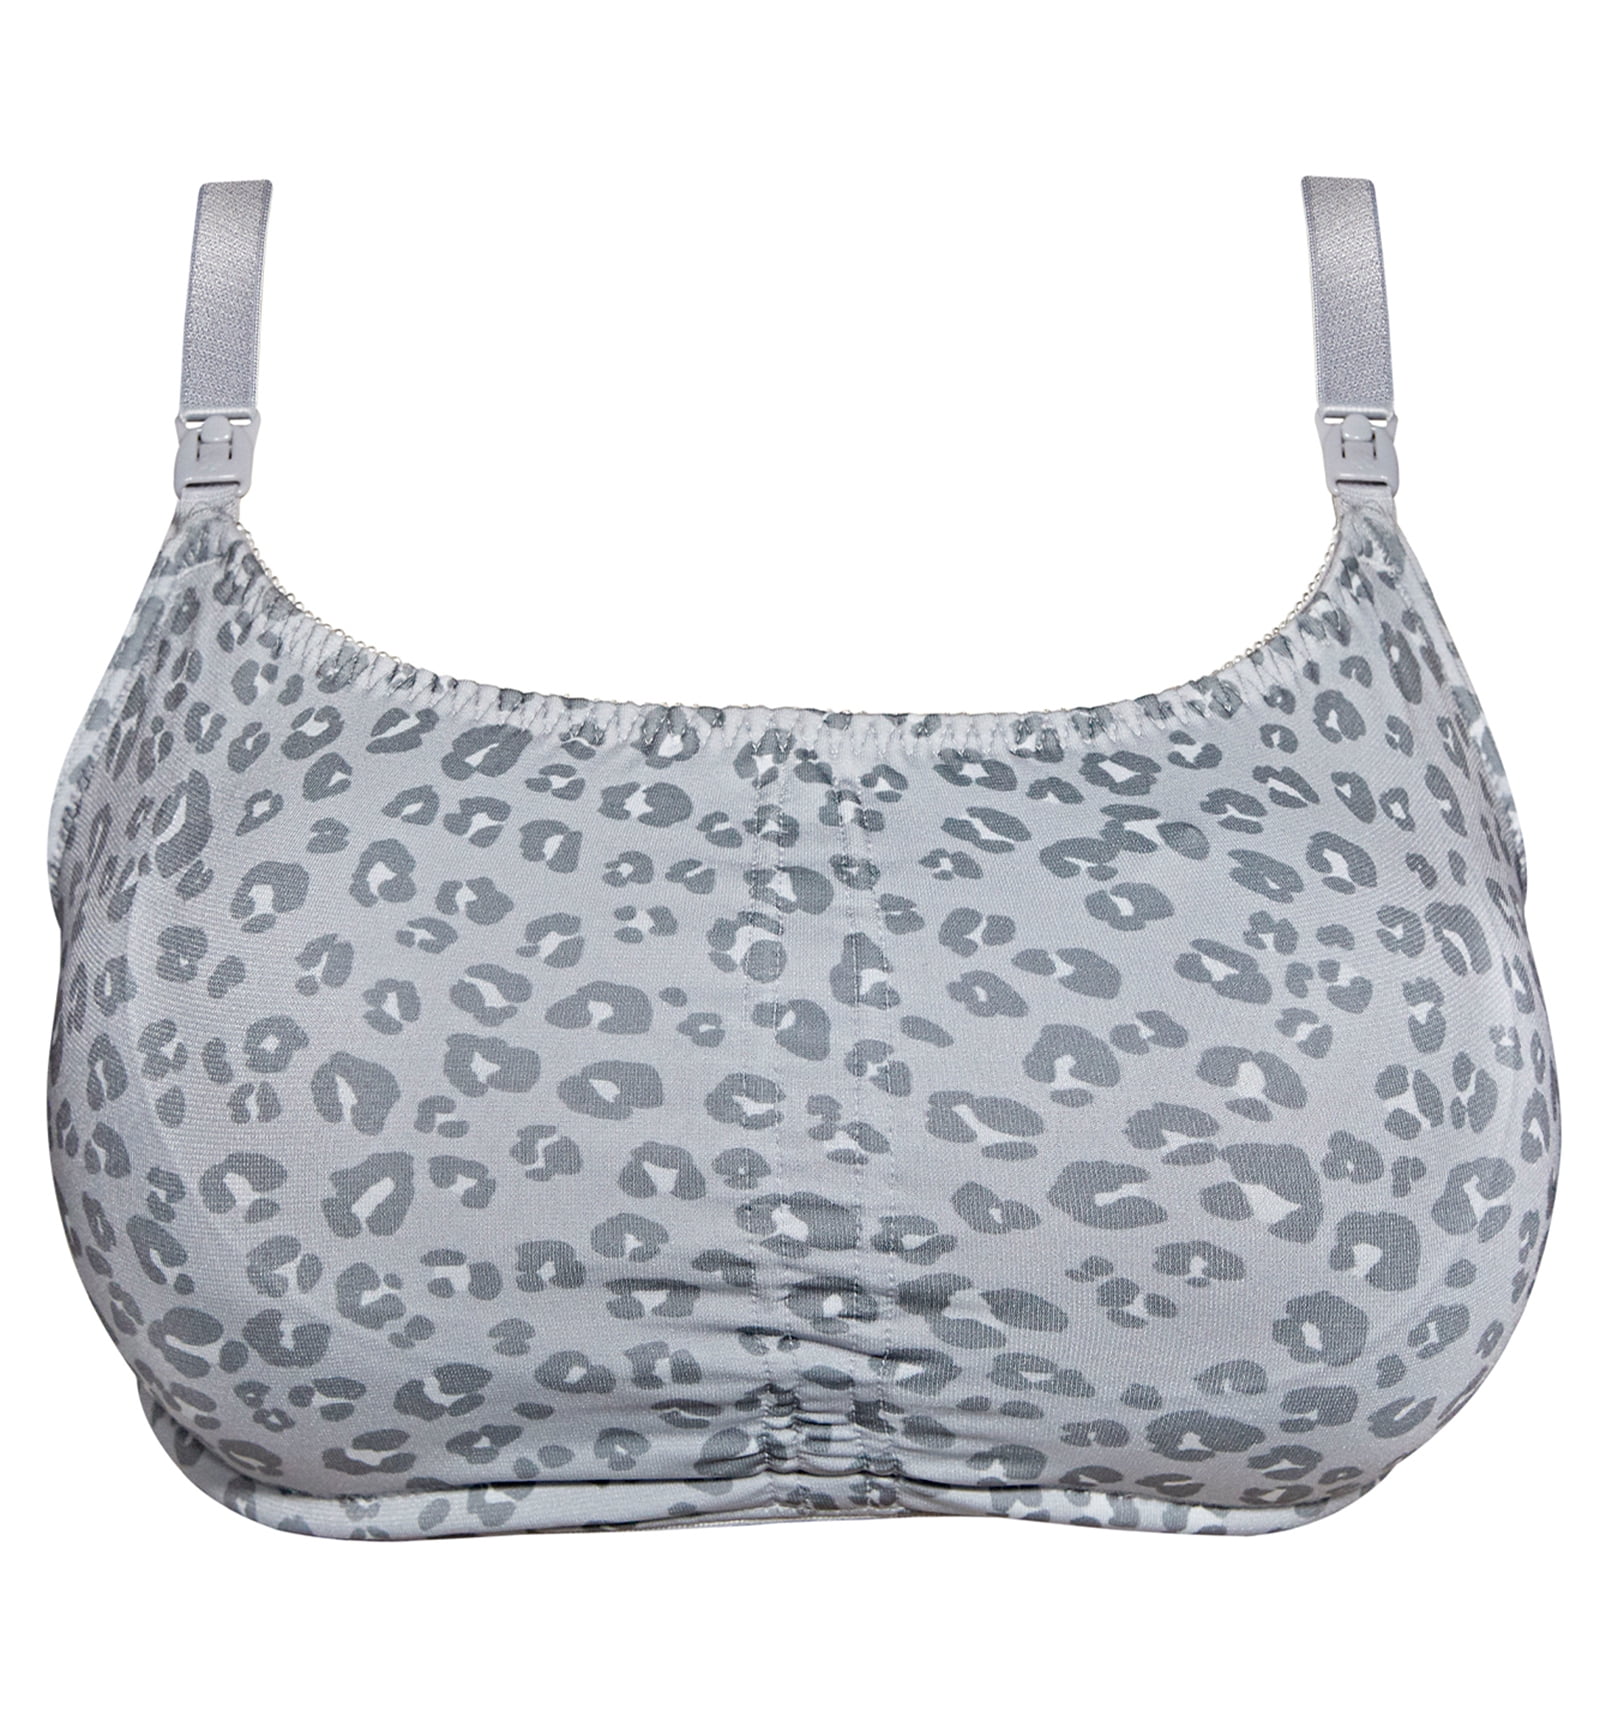 Royce Lingerie Candy Blossom Nursing Bra Review in grey marl: 32 G/GG/H -  Big Cup Little Cup